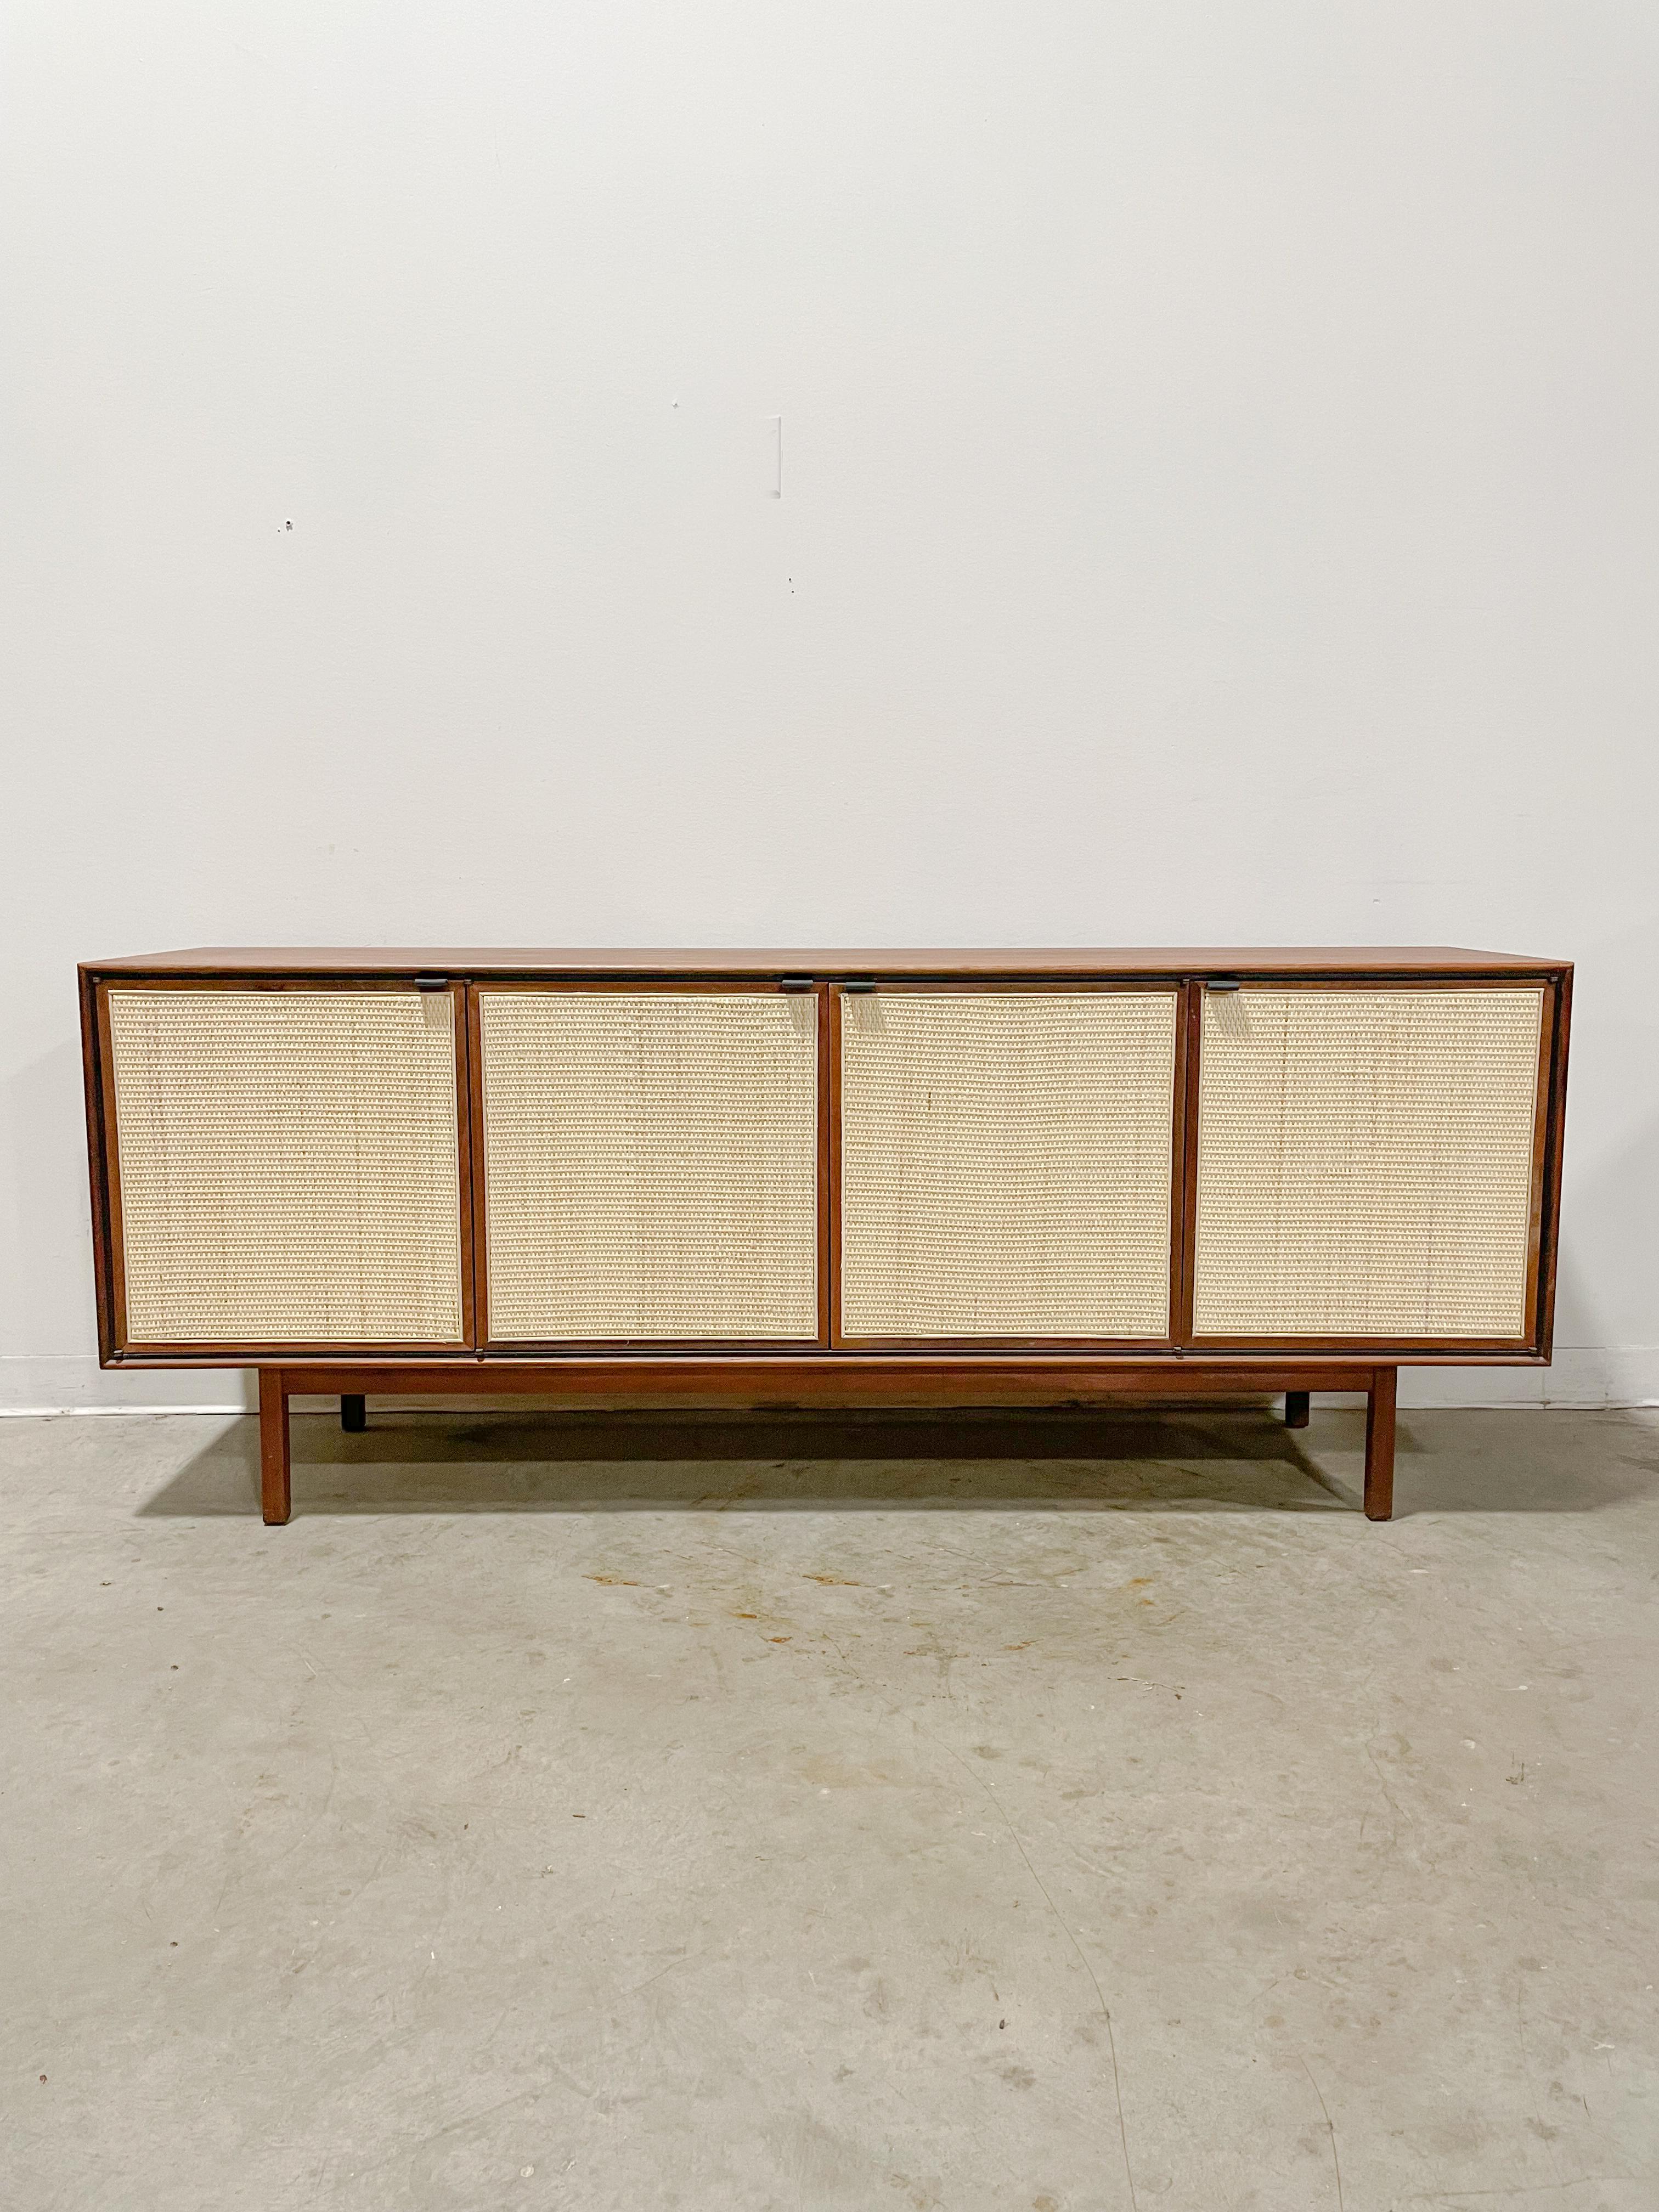 Beautifully proportioned sideboard designed by Jack Cartwright and made by Founders Furniture in the 1960s as part of their Patterns 9 group. Walnut case and legs with newly replaced Danish cane weave door fronts. Ample storage with adjustable